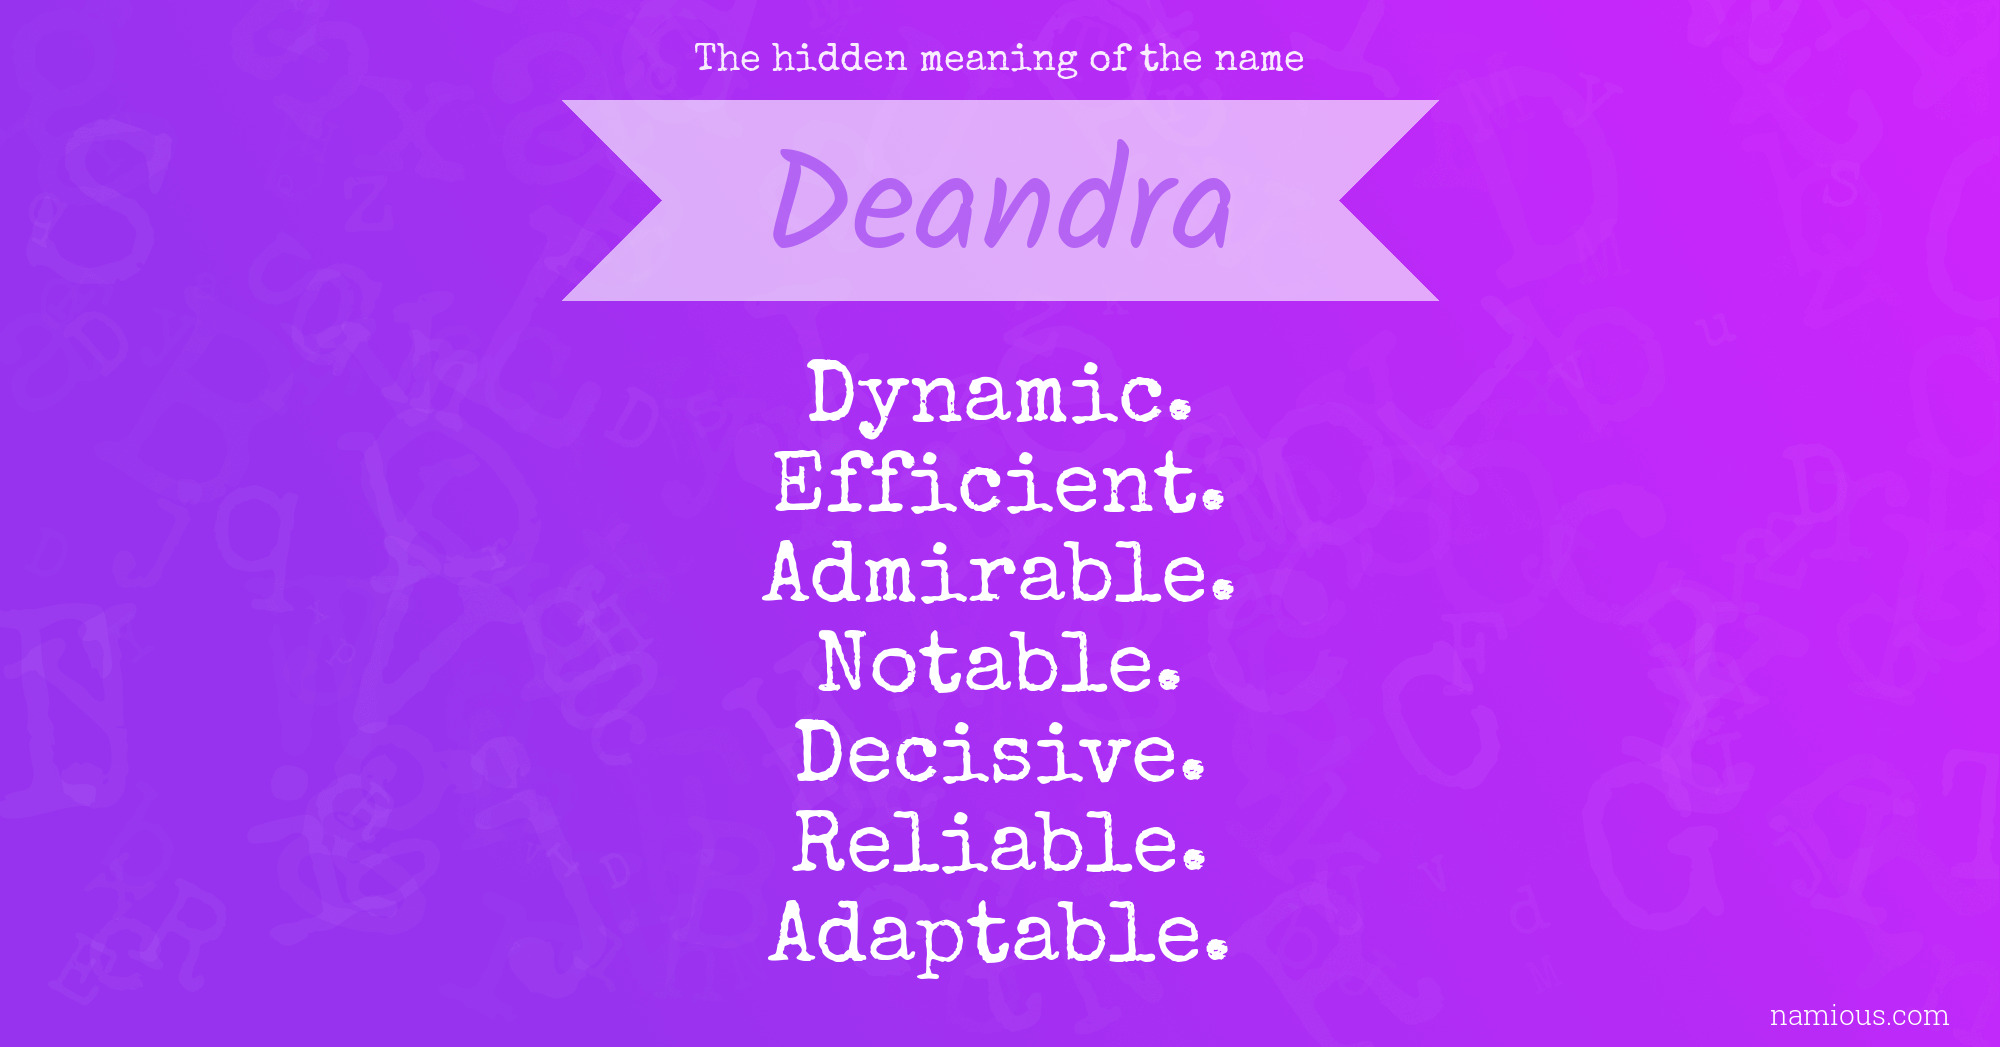 The hidden meaning of the name Deandra